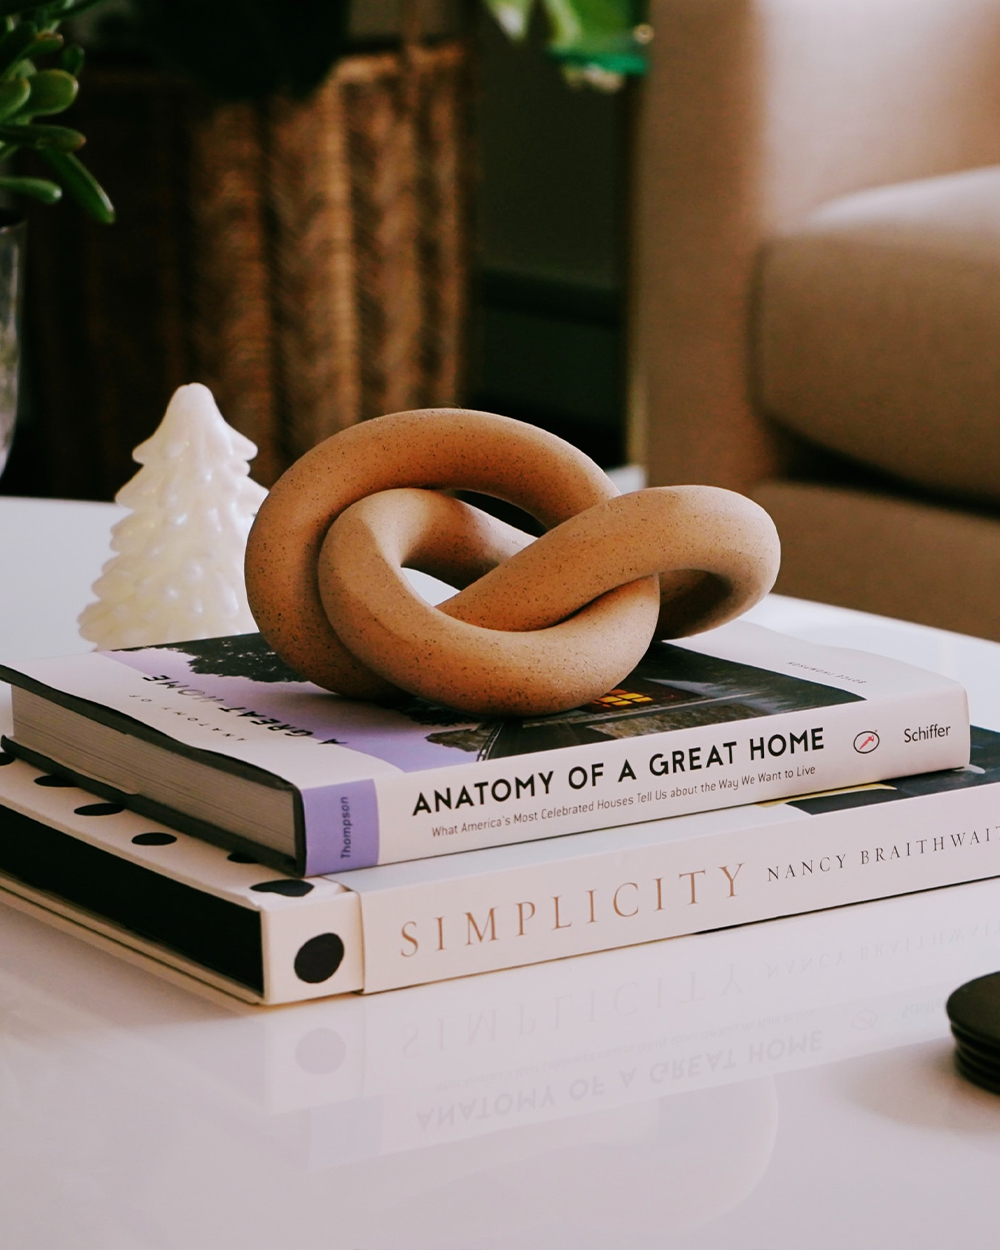 Two coffee table books stacked on each other with a brown decorative chain on top and white tree figurine.